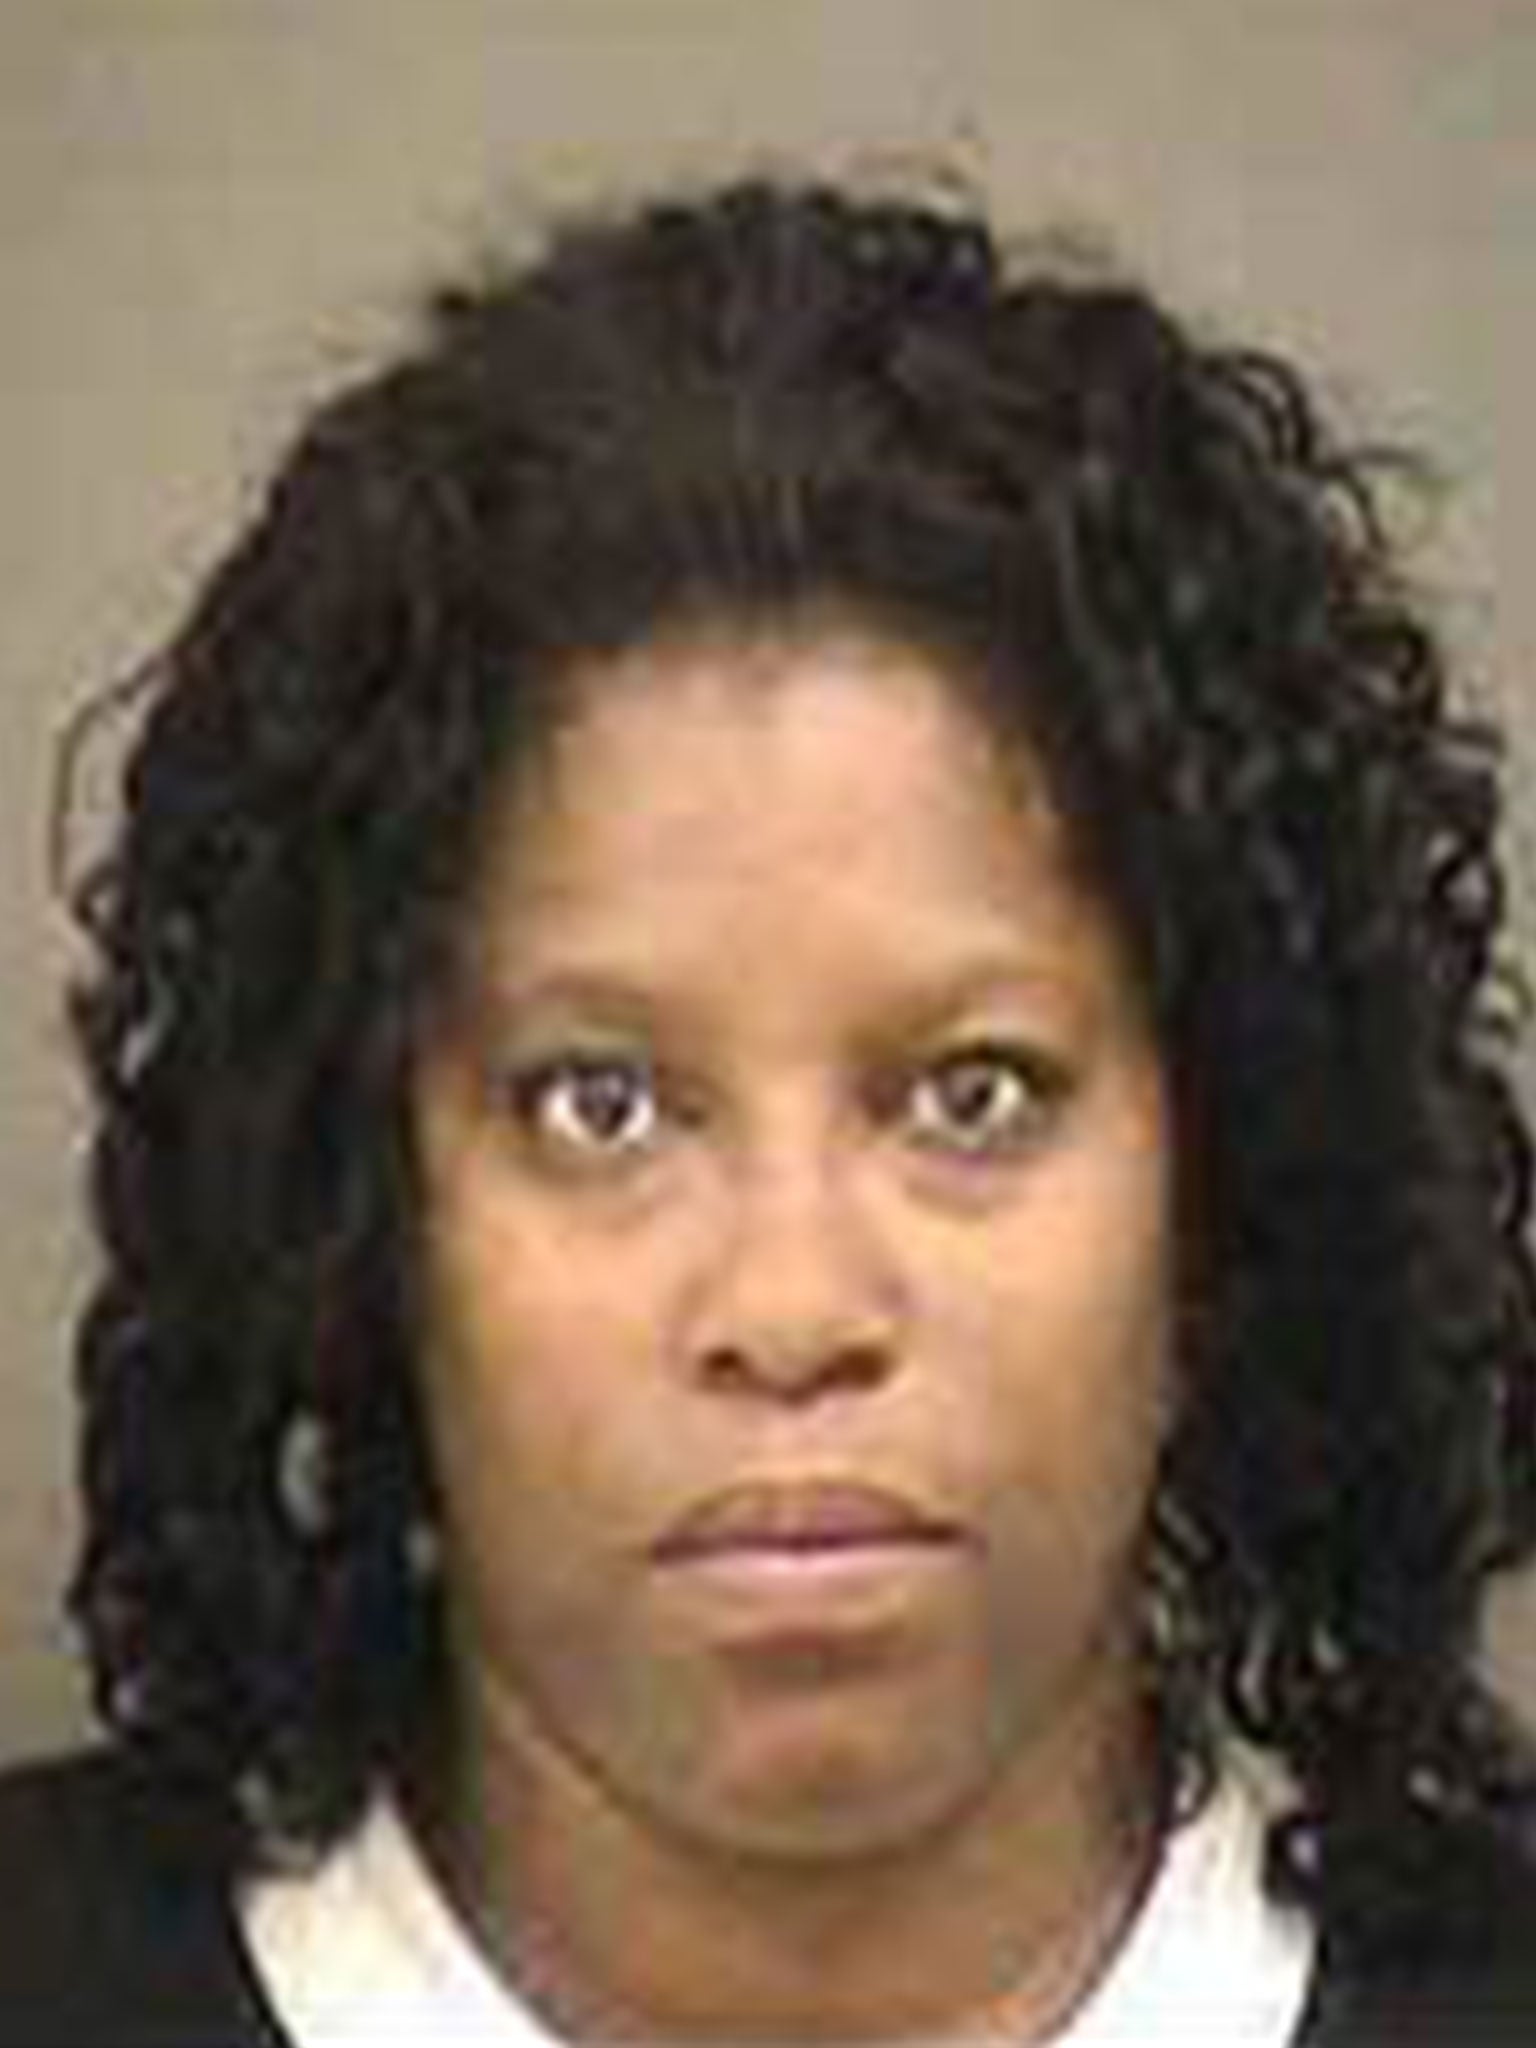 Janie Lachelle Talley, 41, has been charged with contributing to the delinquency of a minor after police said the woman was present when her son poured fingernail polish on himself before setting himself ablaze.